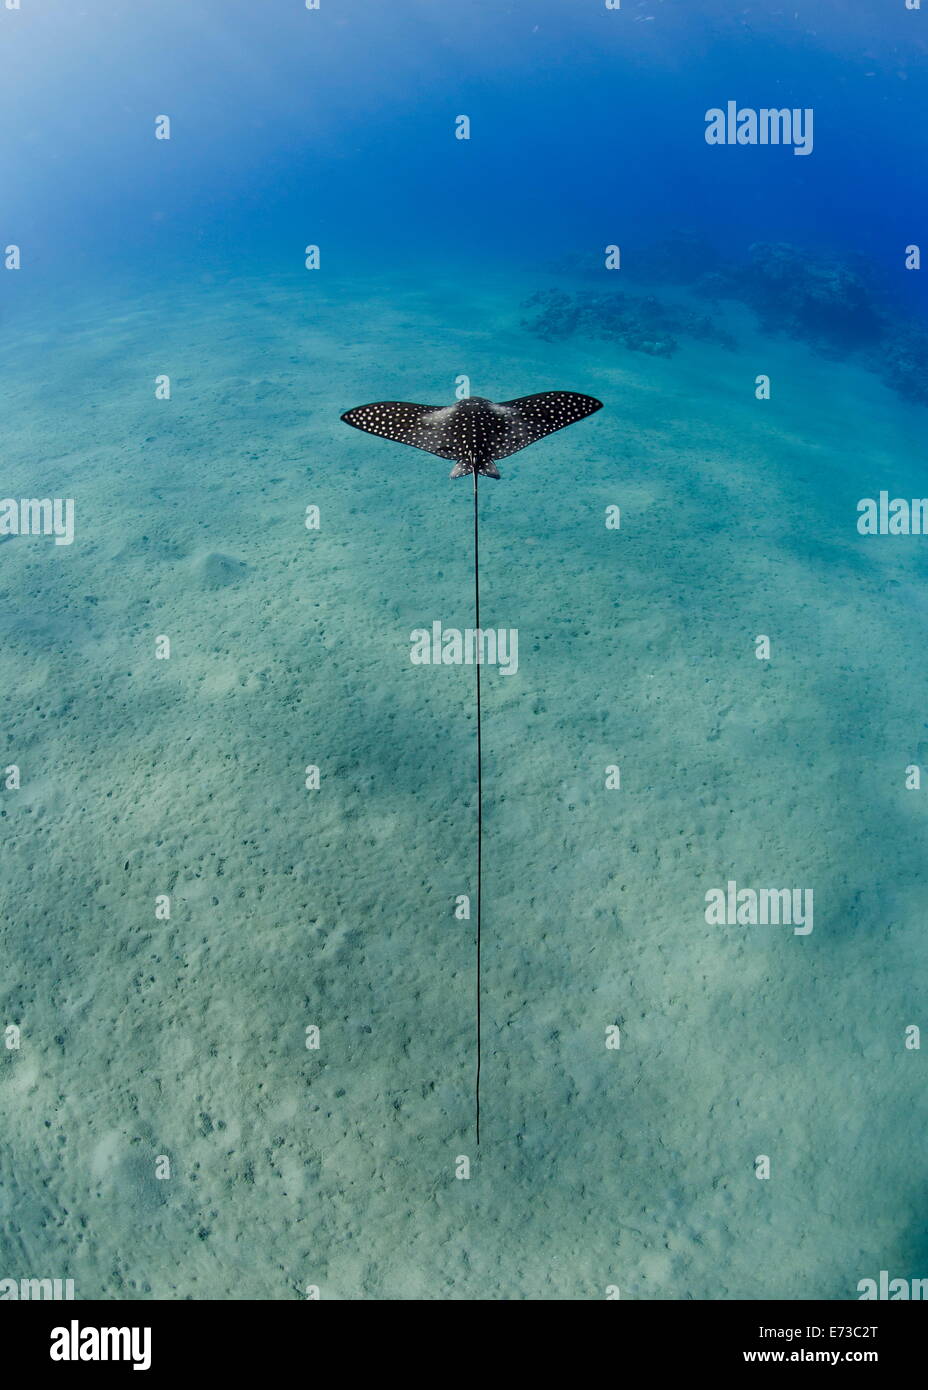 Spotted eagle ray juvenile over sandy ocean floor, from above, Naama Bay, Sharm El Sheikh, Red Sea, Egypt, North Africa Stock Photo